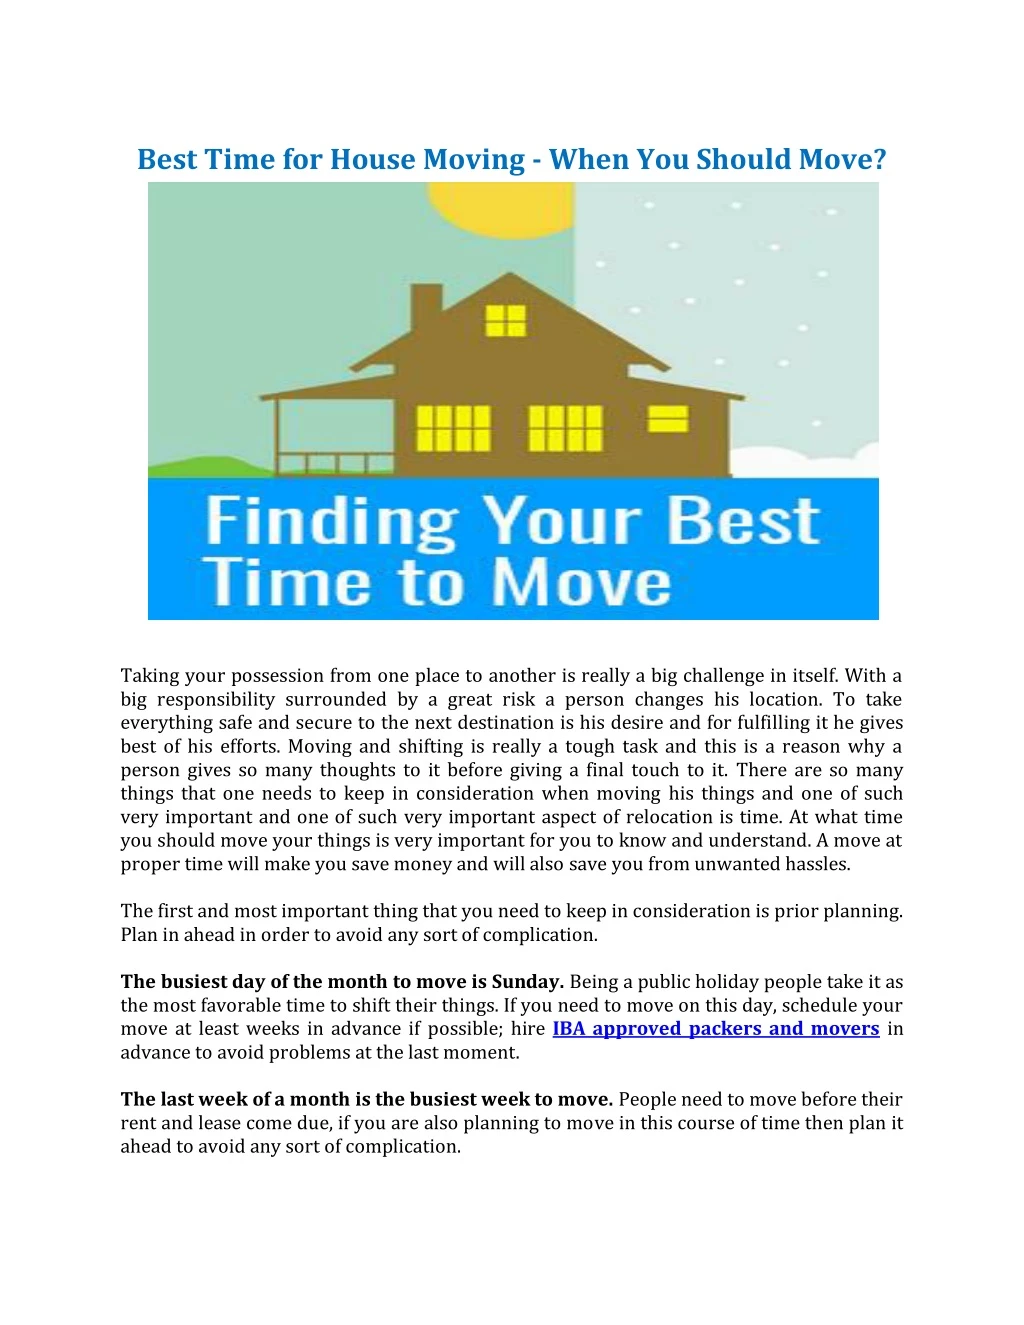 best time for house moving when you should move